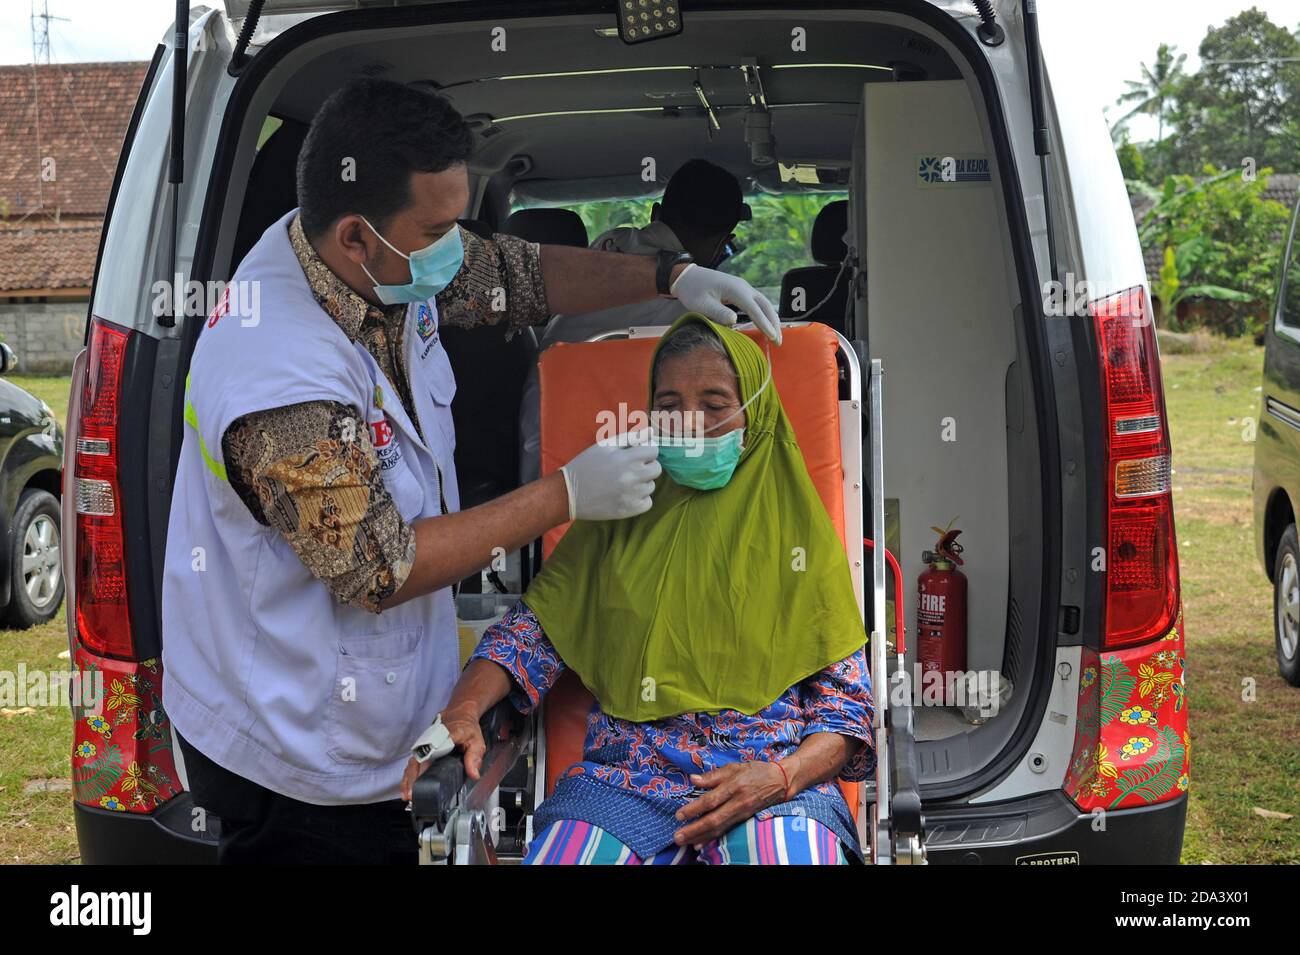 Yogyakarta, Indonesia. 9th Nov, 2020. A health worker checks the health condition of an elderly woman at temporary shelter for villagers living near Mount Merapi at Glagaharjo village in Cangkringan, Yogyakarta, Indonesia, Nov. 9, 2020. Merapi is the most active volcano in Indonesia. The status of the 2,968-m high volcano was declared as the second-highest alert level, which means that its eruption can occur at any time. Credit: Supriyanto/Xinhua/Alamy Live News Stock Photo